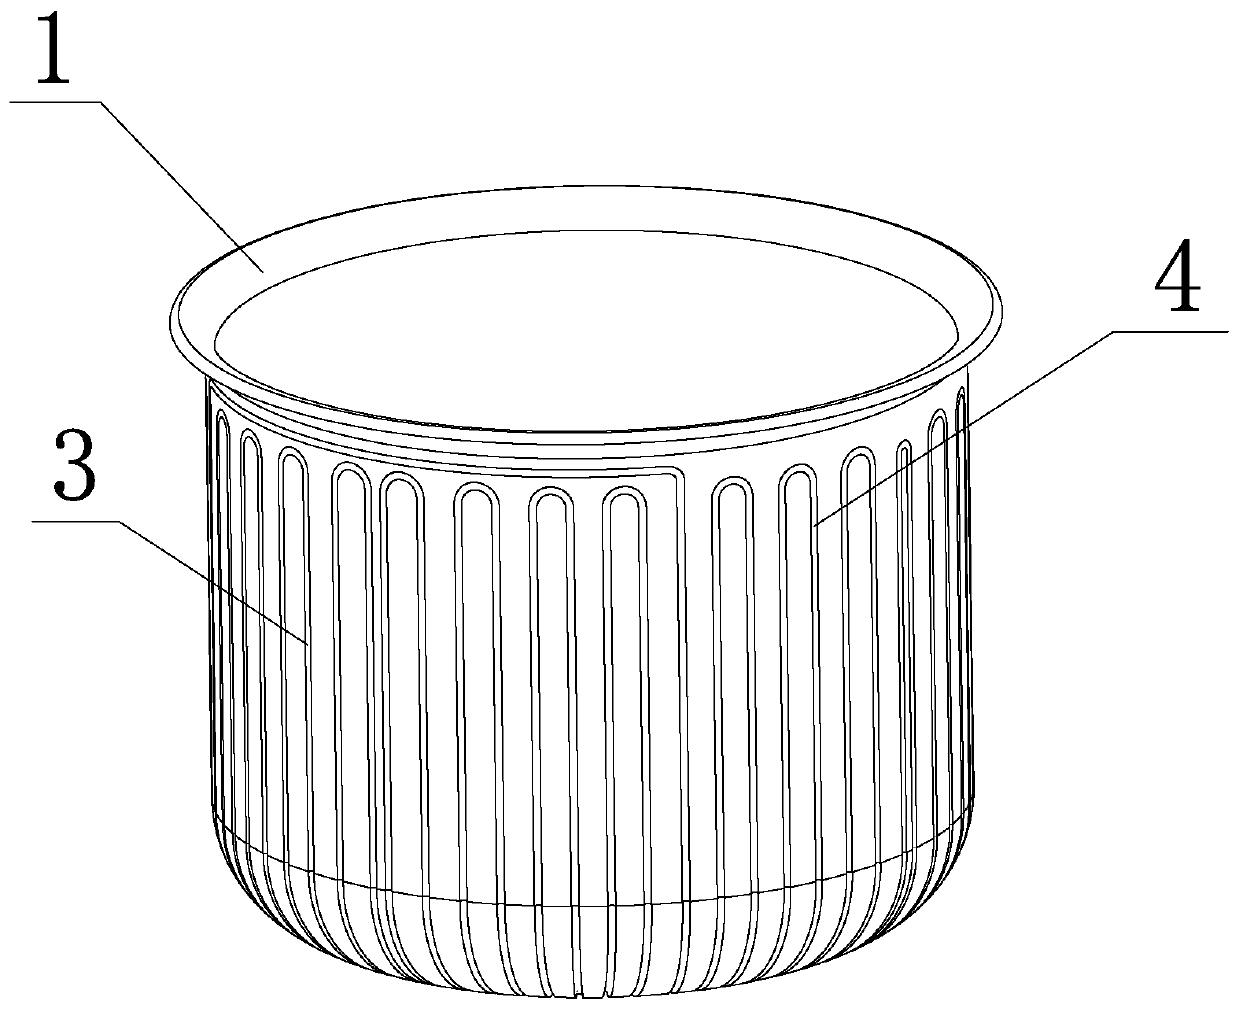 Electric cooker inner container based on pulsating heat pipe heat transfer function